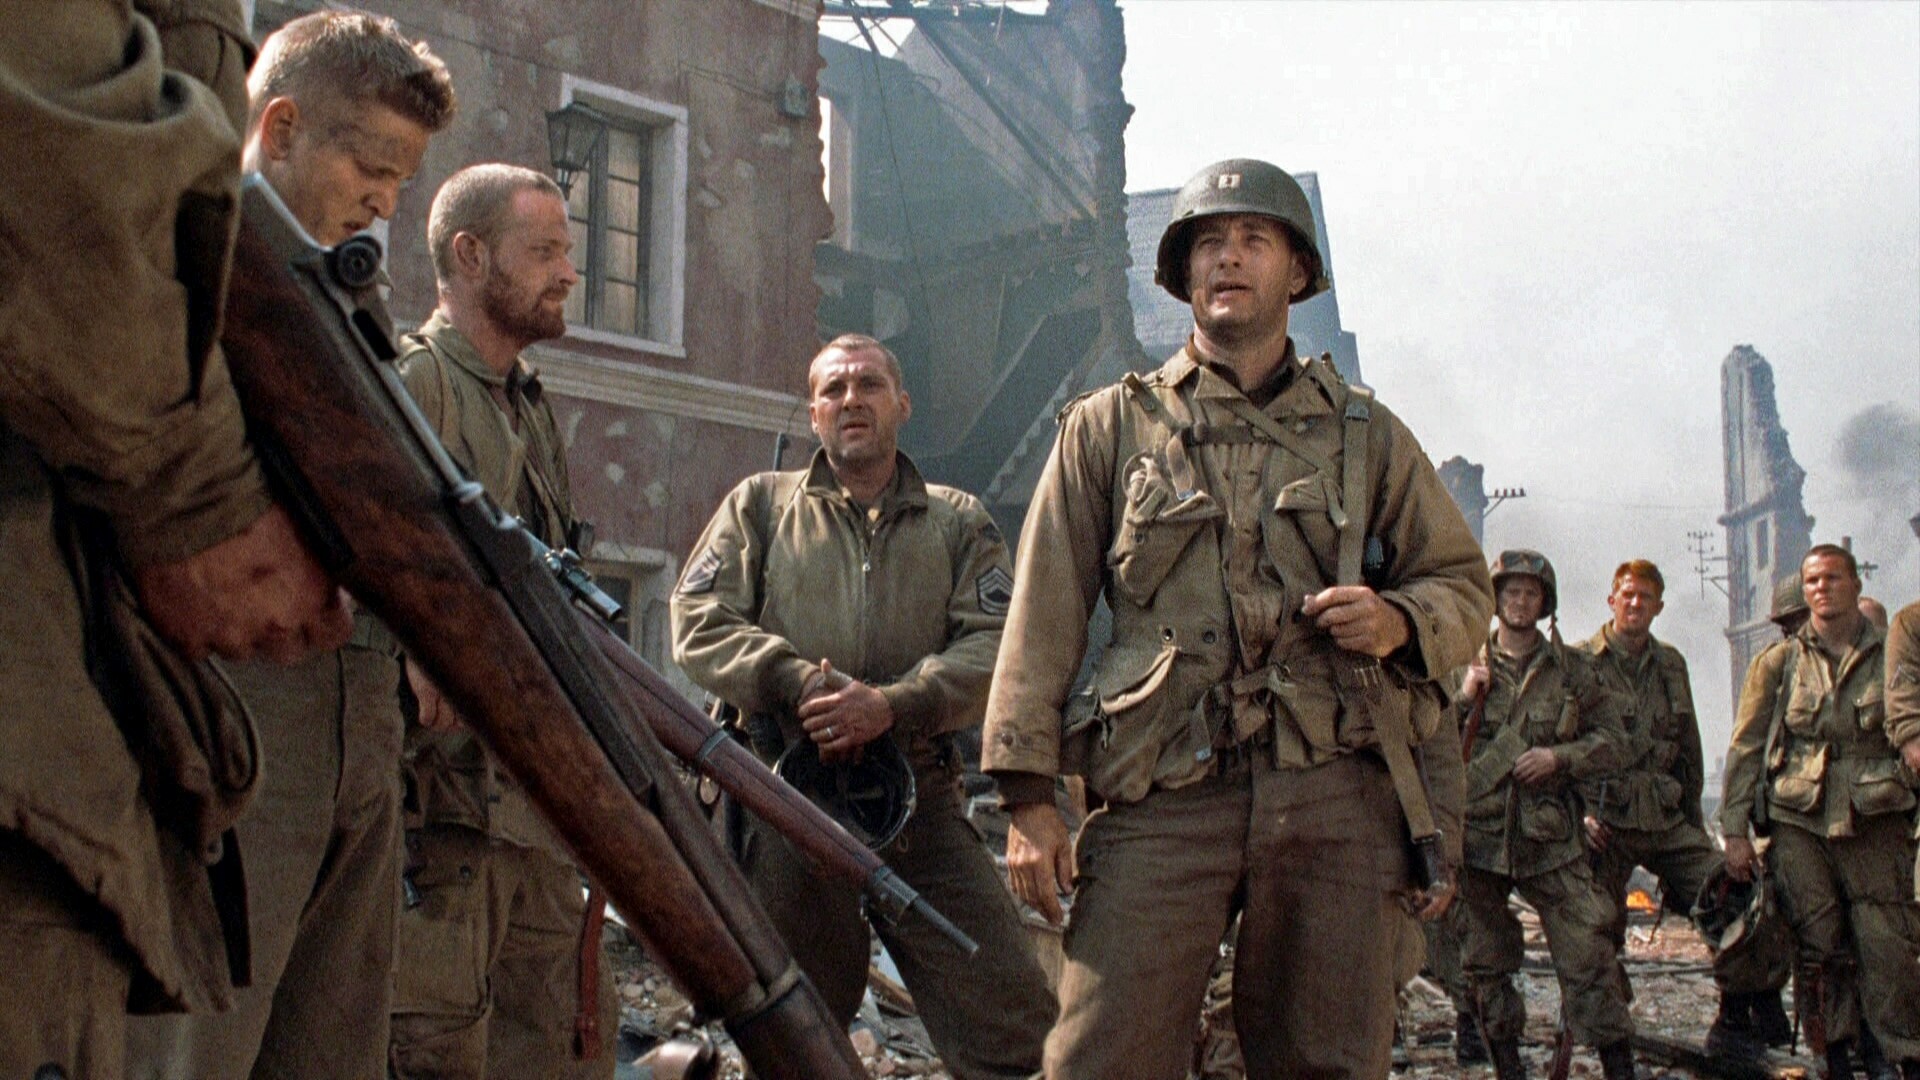 Saving Private Ryan: The film was released in 2,463 theaters on July 24, 1998. 1920x1080 Full HD Background.